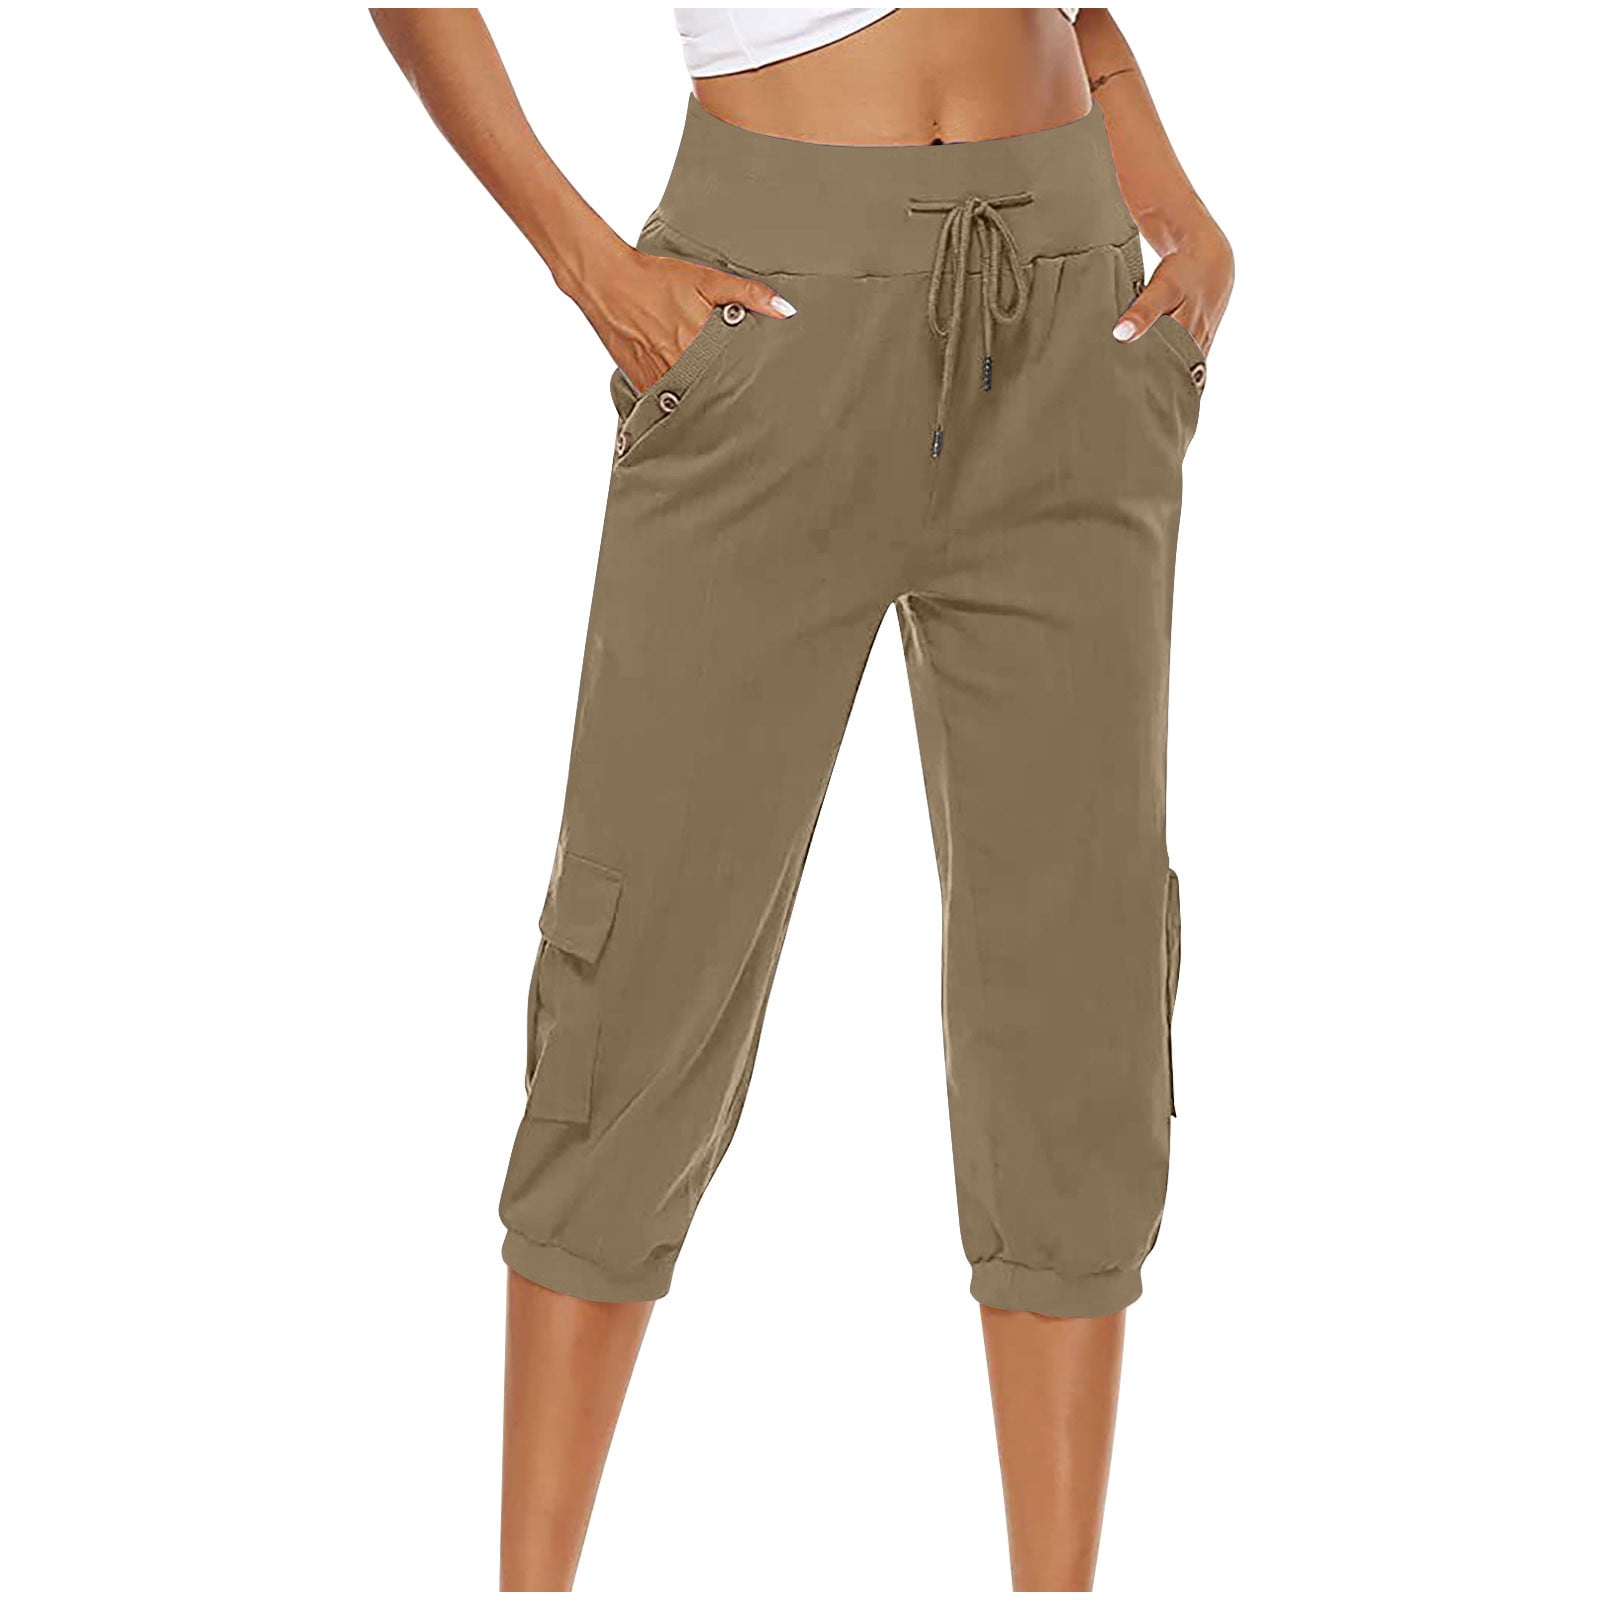 Women's Loose Solid Color Cropped Capris Joggers Pants Harem Sweatpants  Stylish Soft Casual Lounge Capris with Pockets